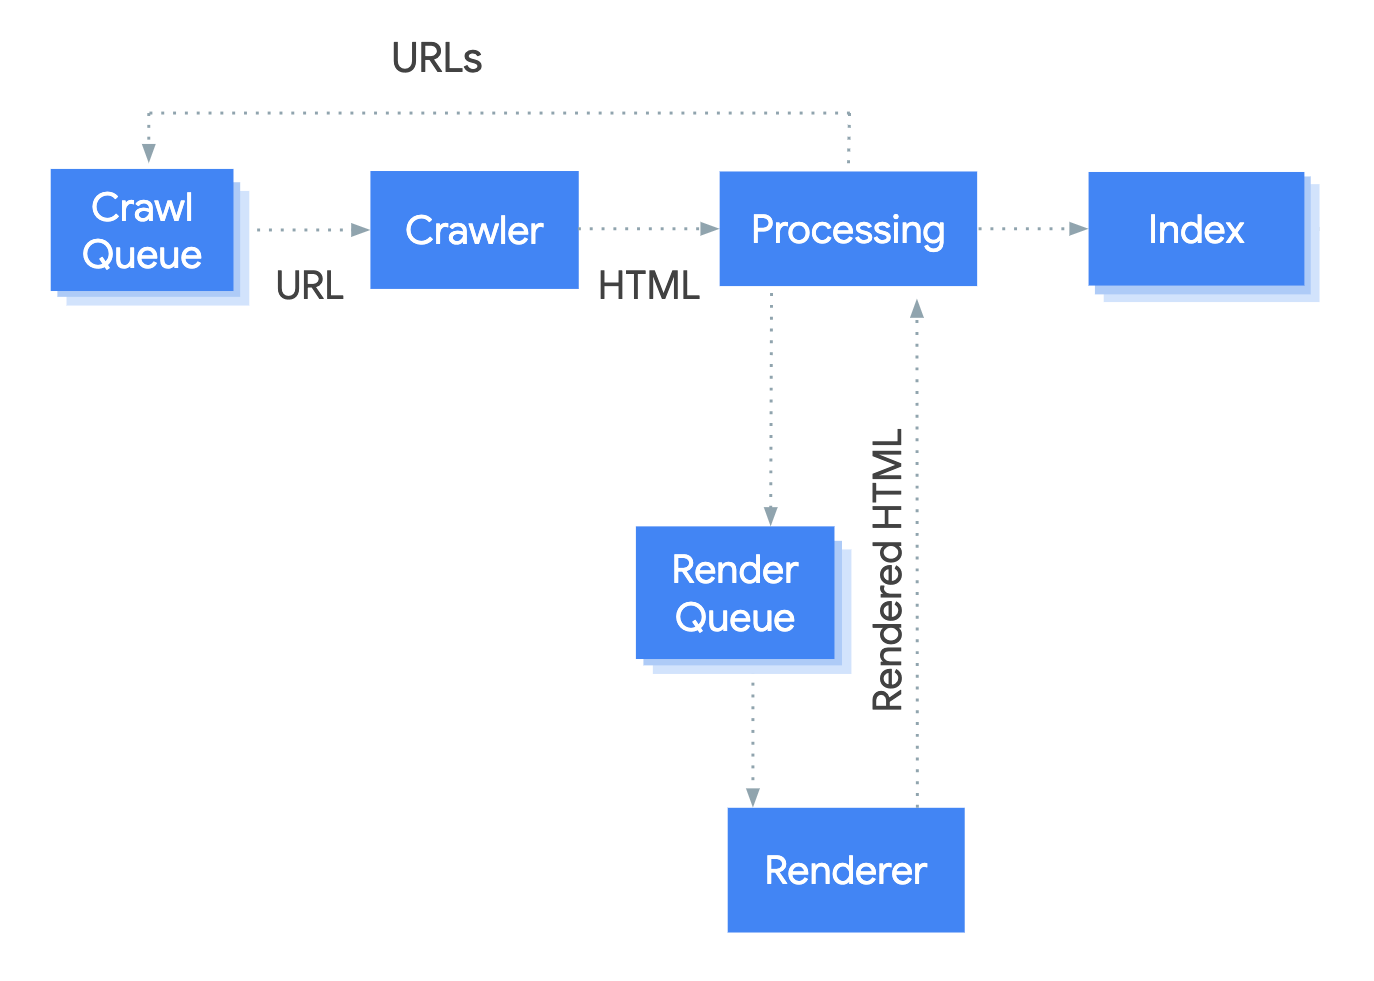 Google's documentation showing the crawling and indexing process